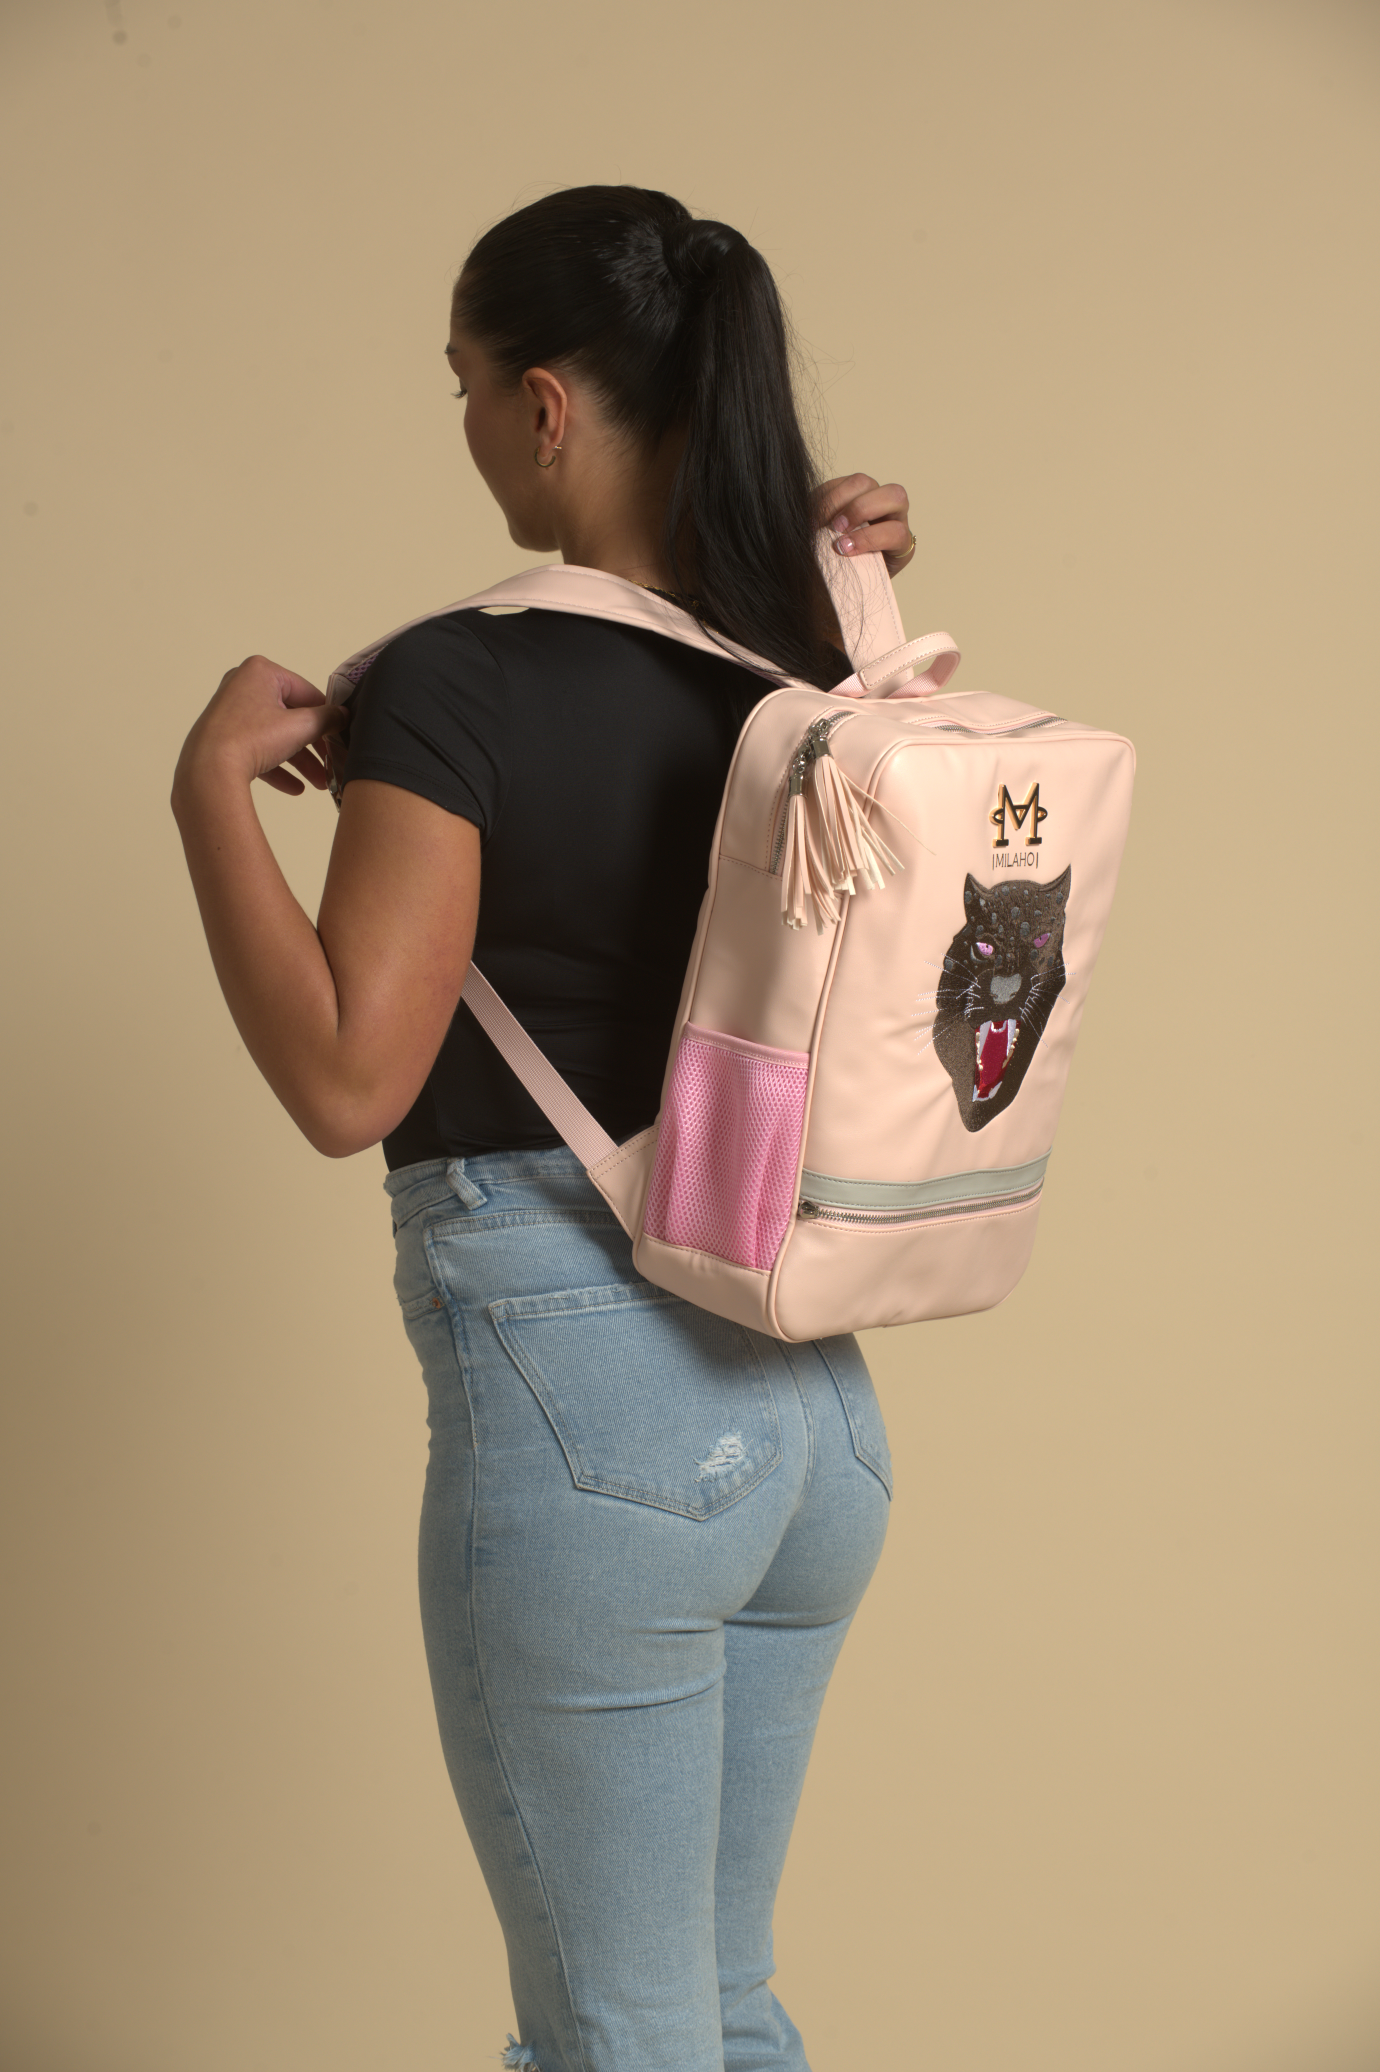 Nude-Pink Backpack